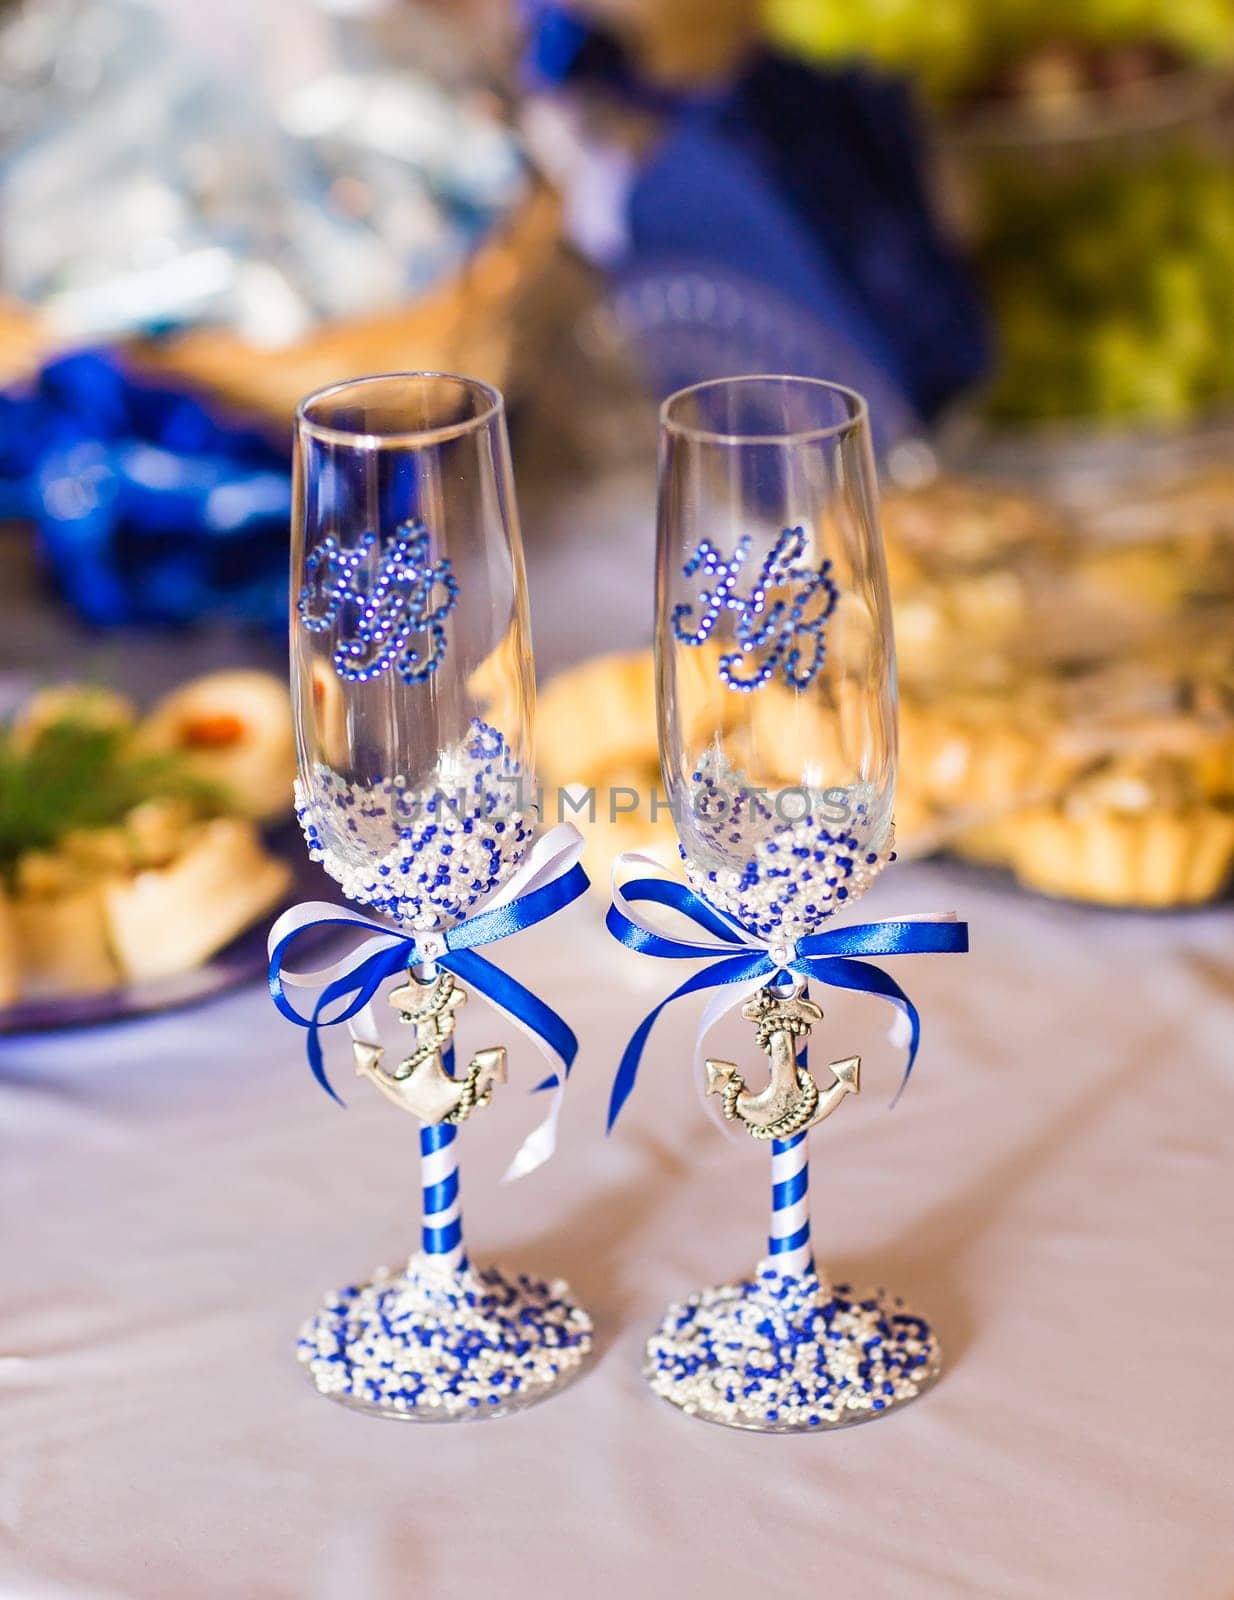 decorated glass of champagne. Two wedding glasses